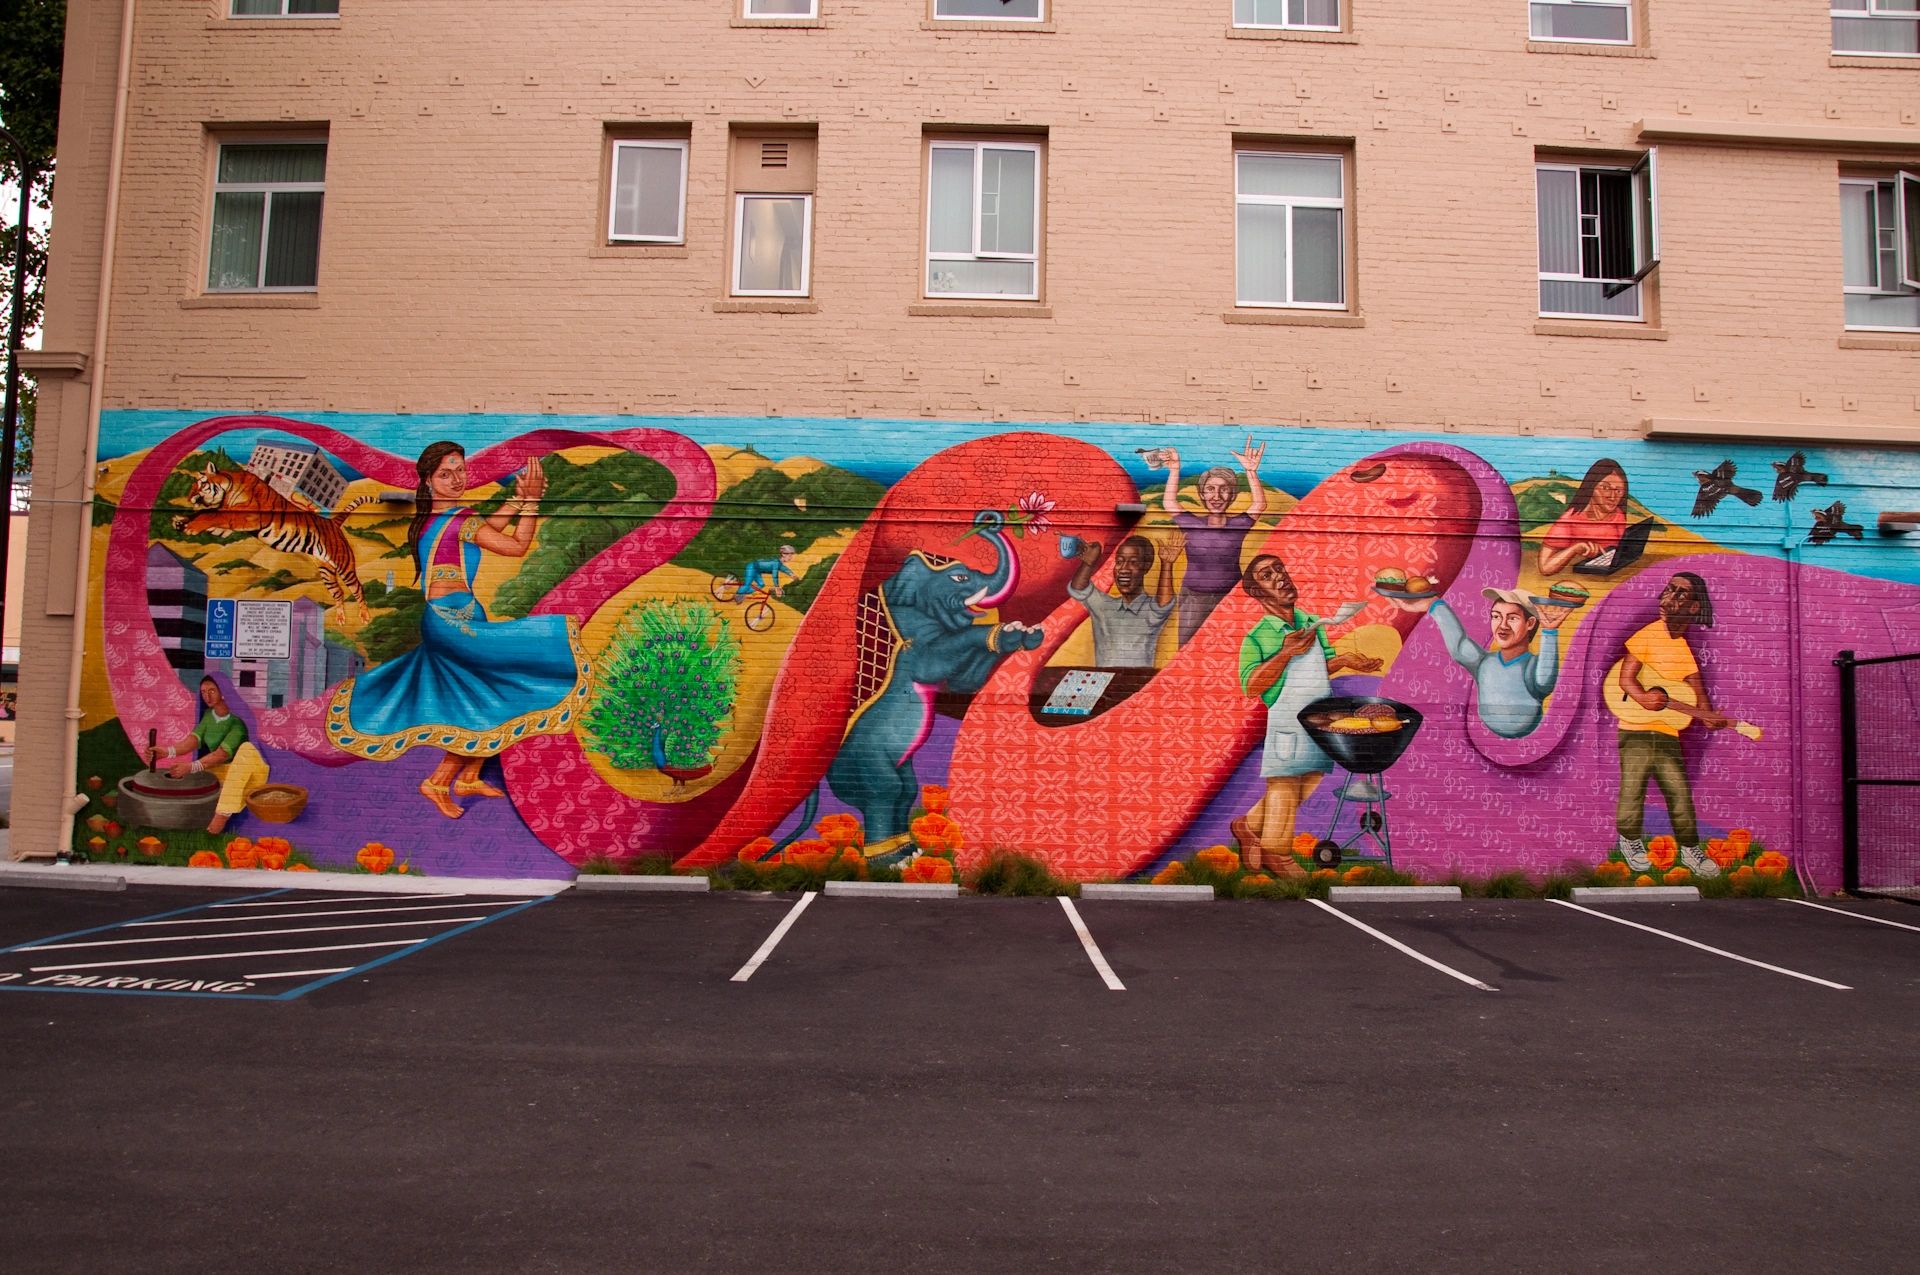 A colorful mural with East Indian cultural symbols, and multicultural figures busy with activities.